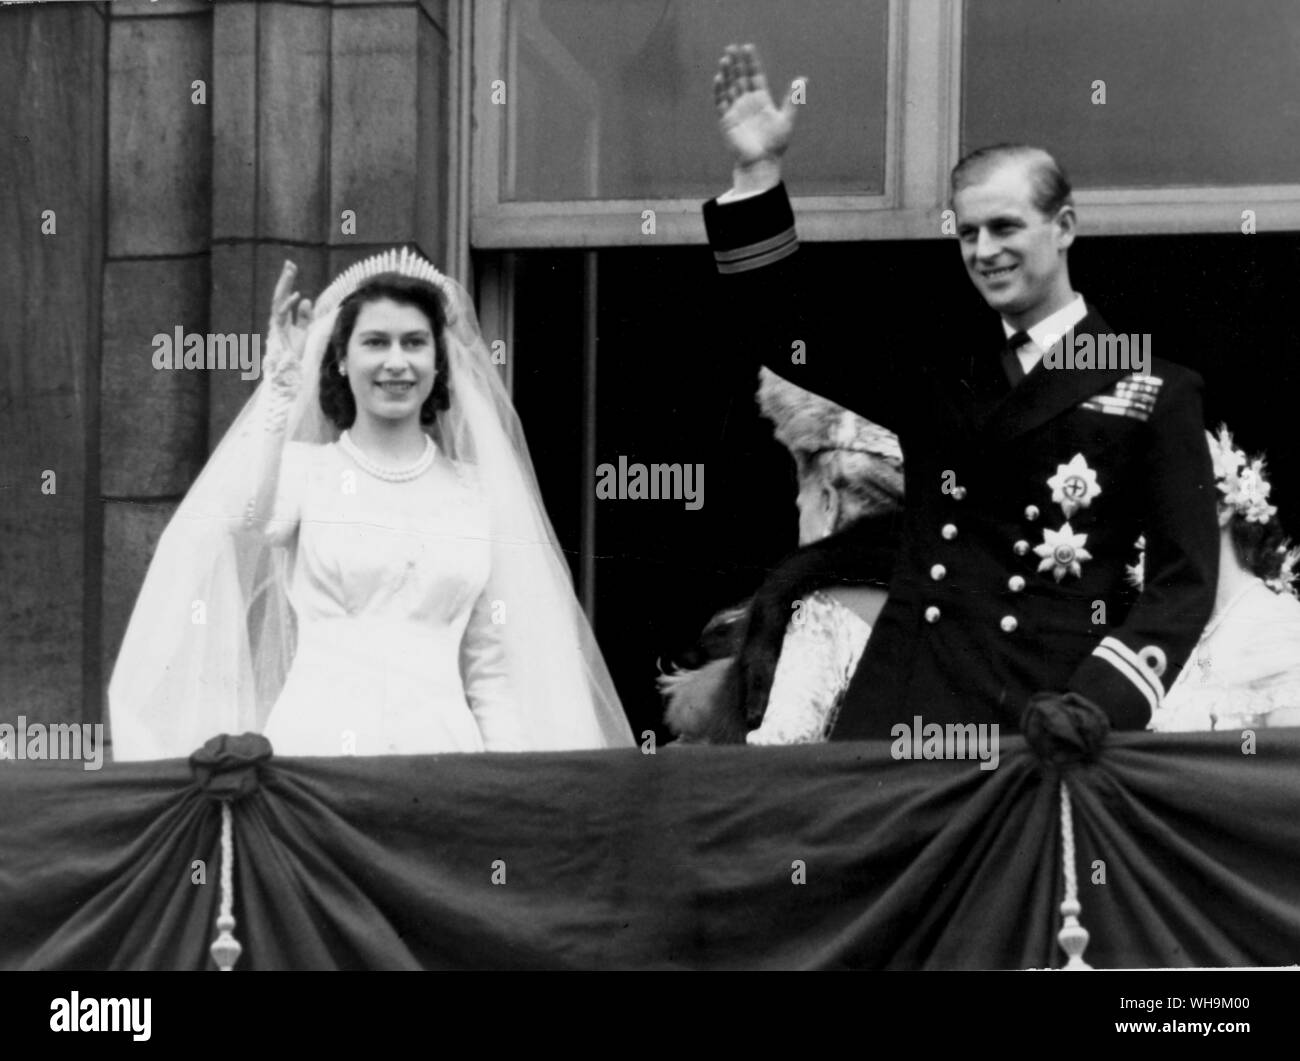 Princess Elizabeth after marrying Philip, 20th November 1947. On the balcony at Buckingham Palace. Later to become Queen Elizabeth II and Prince Philip, the Duke of Edinburgh. Stock Photo